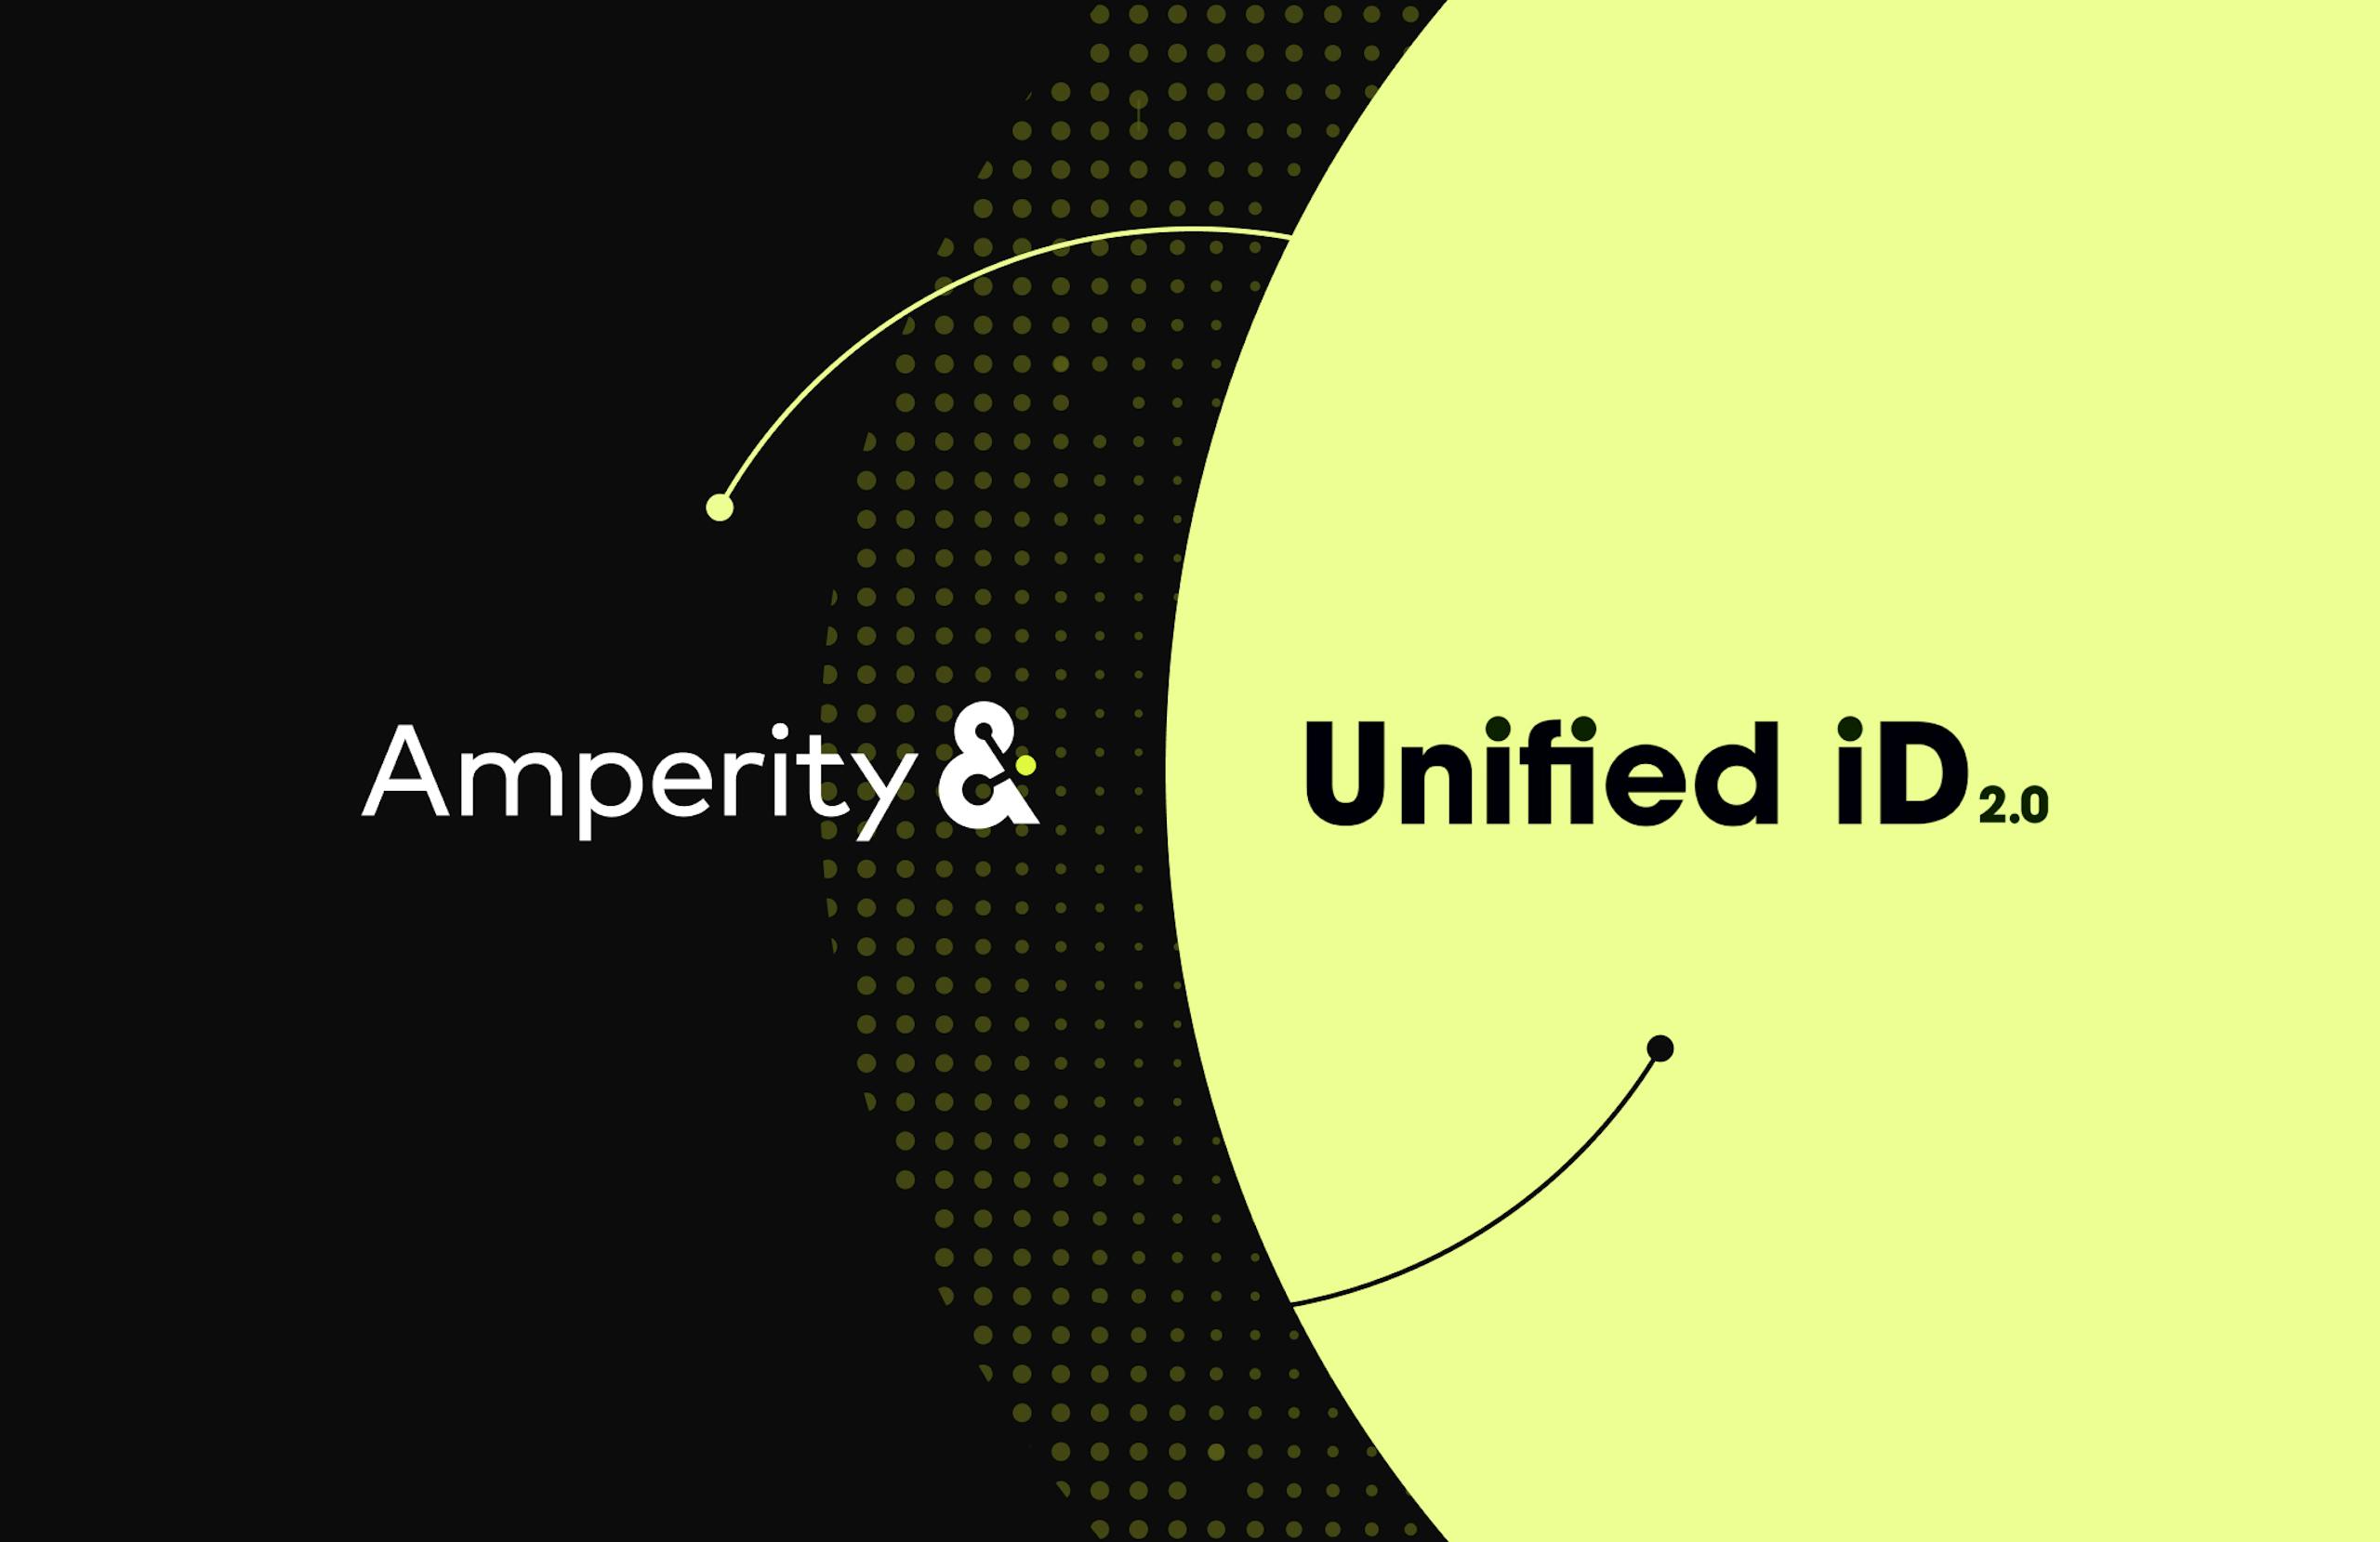 Amperity & Unified ID 2.0